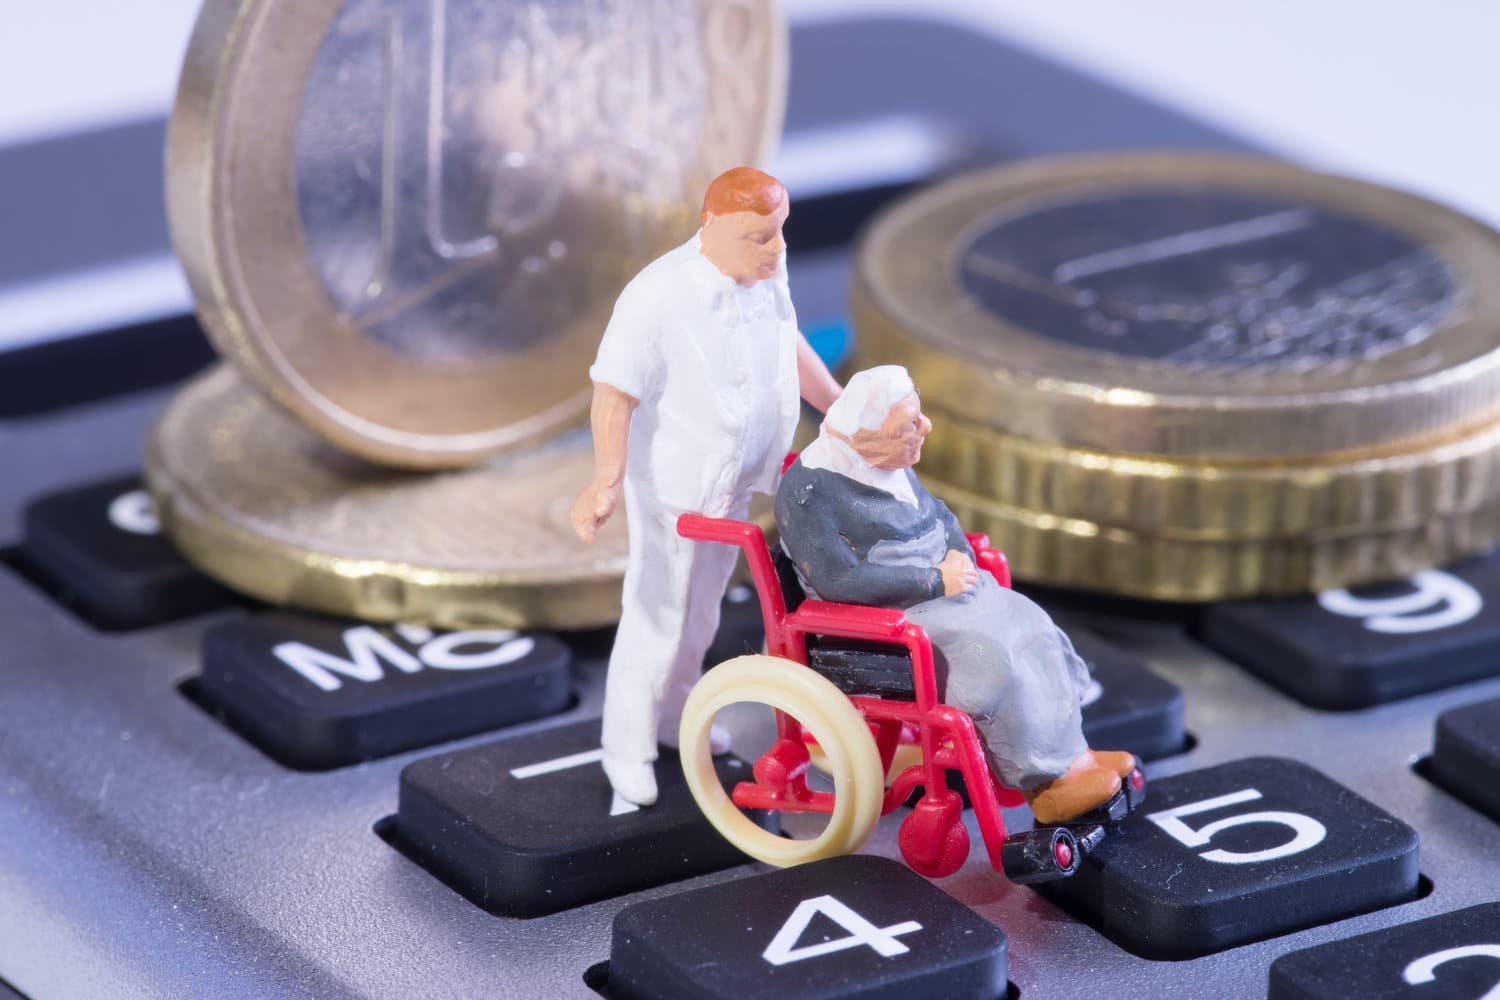 Carers could be eligible for state benefits